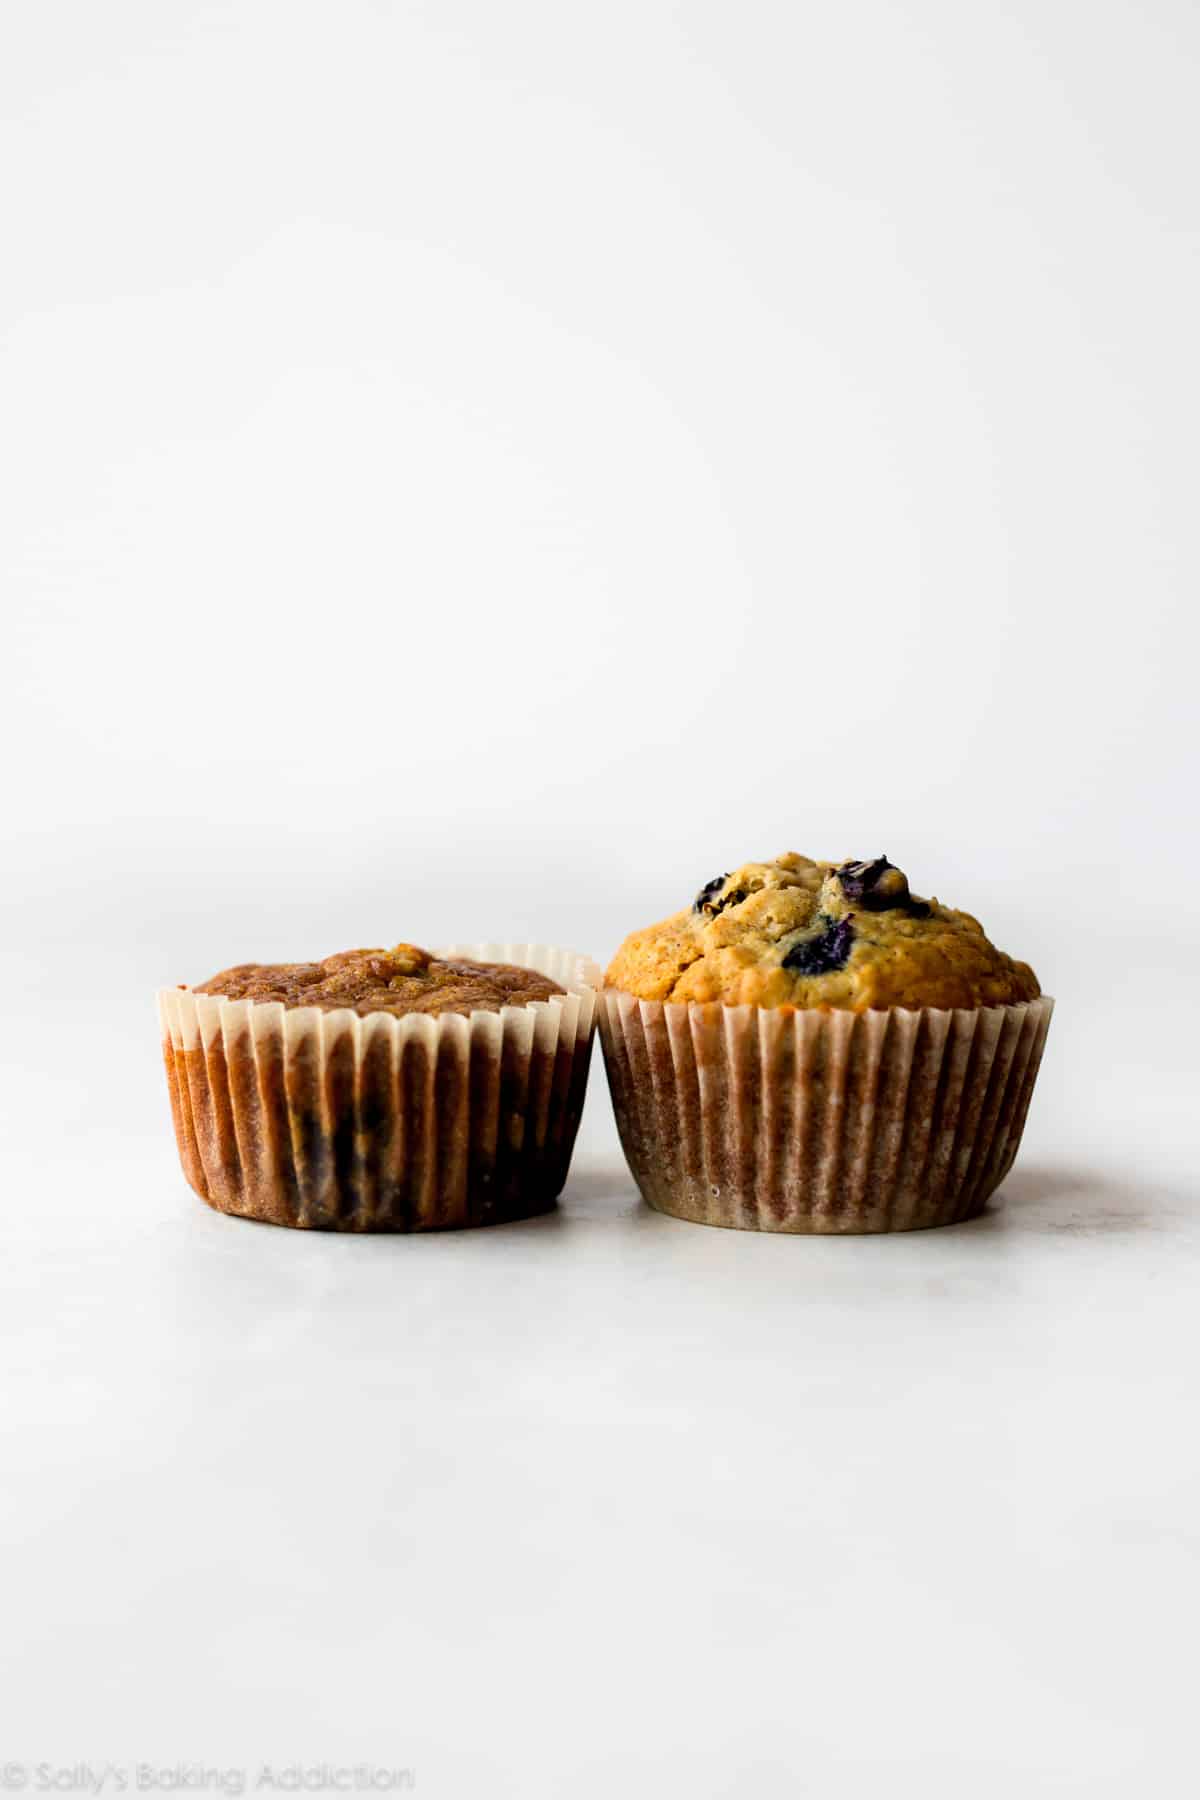 2 muffins including one flat muffin and one regular muffin